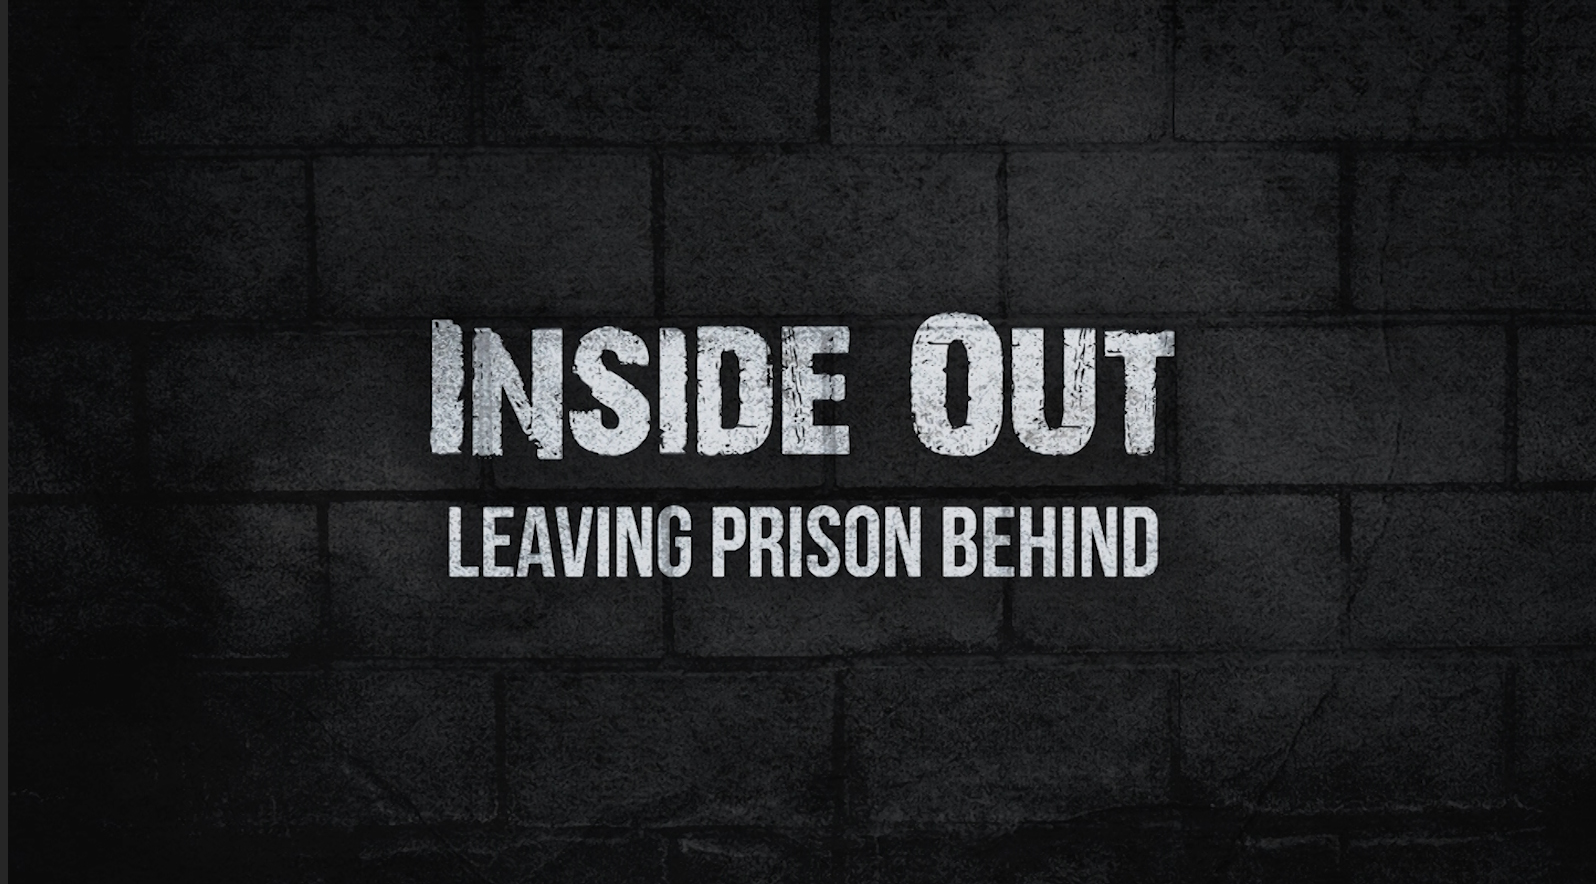 “Inside Out: Leaving Prison Behind,” 360 North’s new documentary, premieres 8 p.m. Friday, June 23, on 360 North. (Still courtesy 360 North)